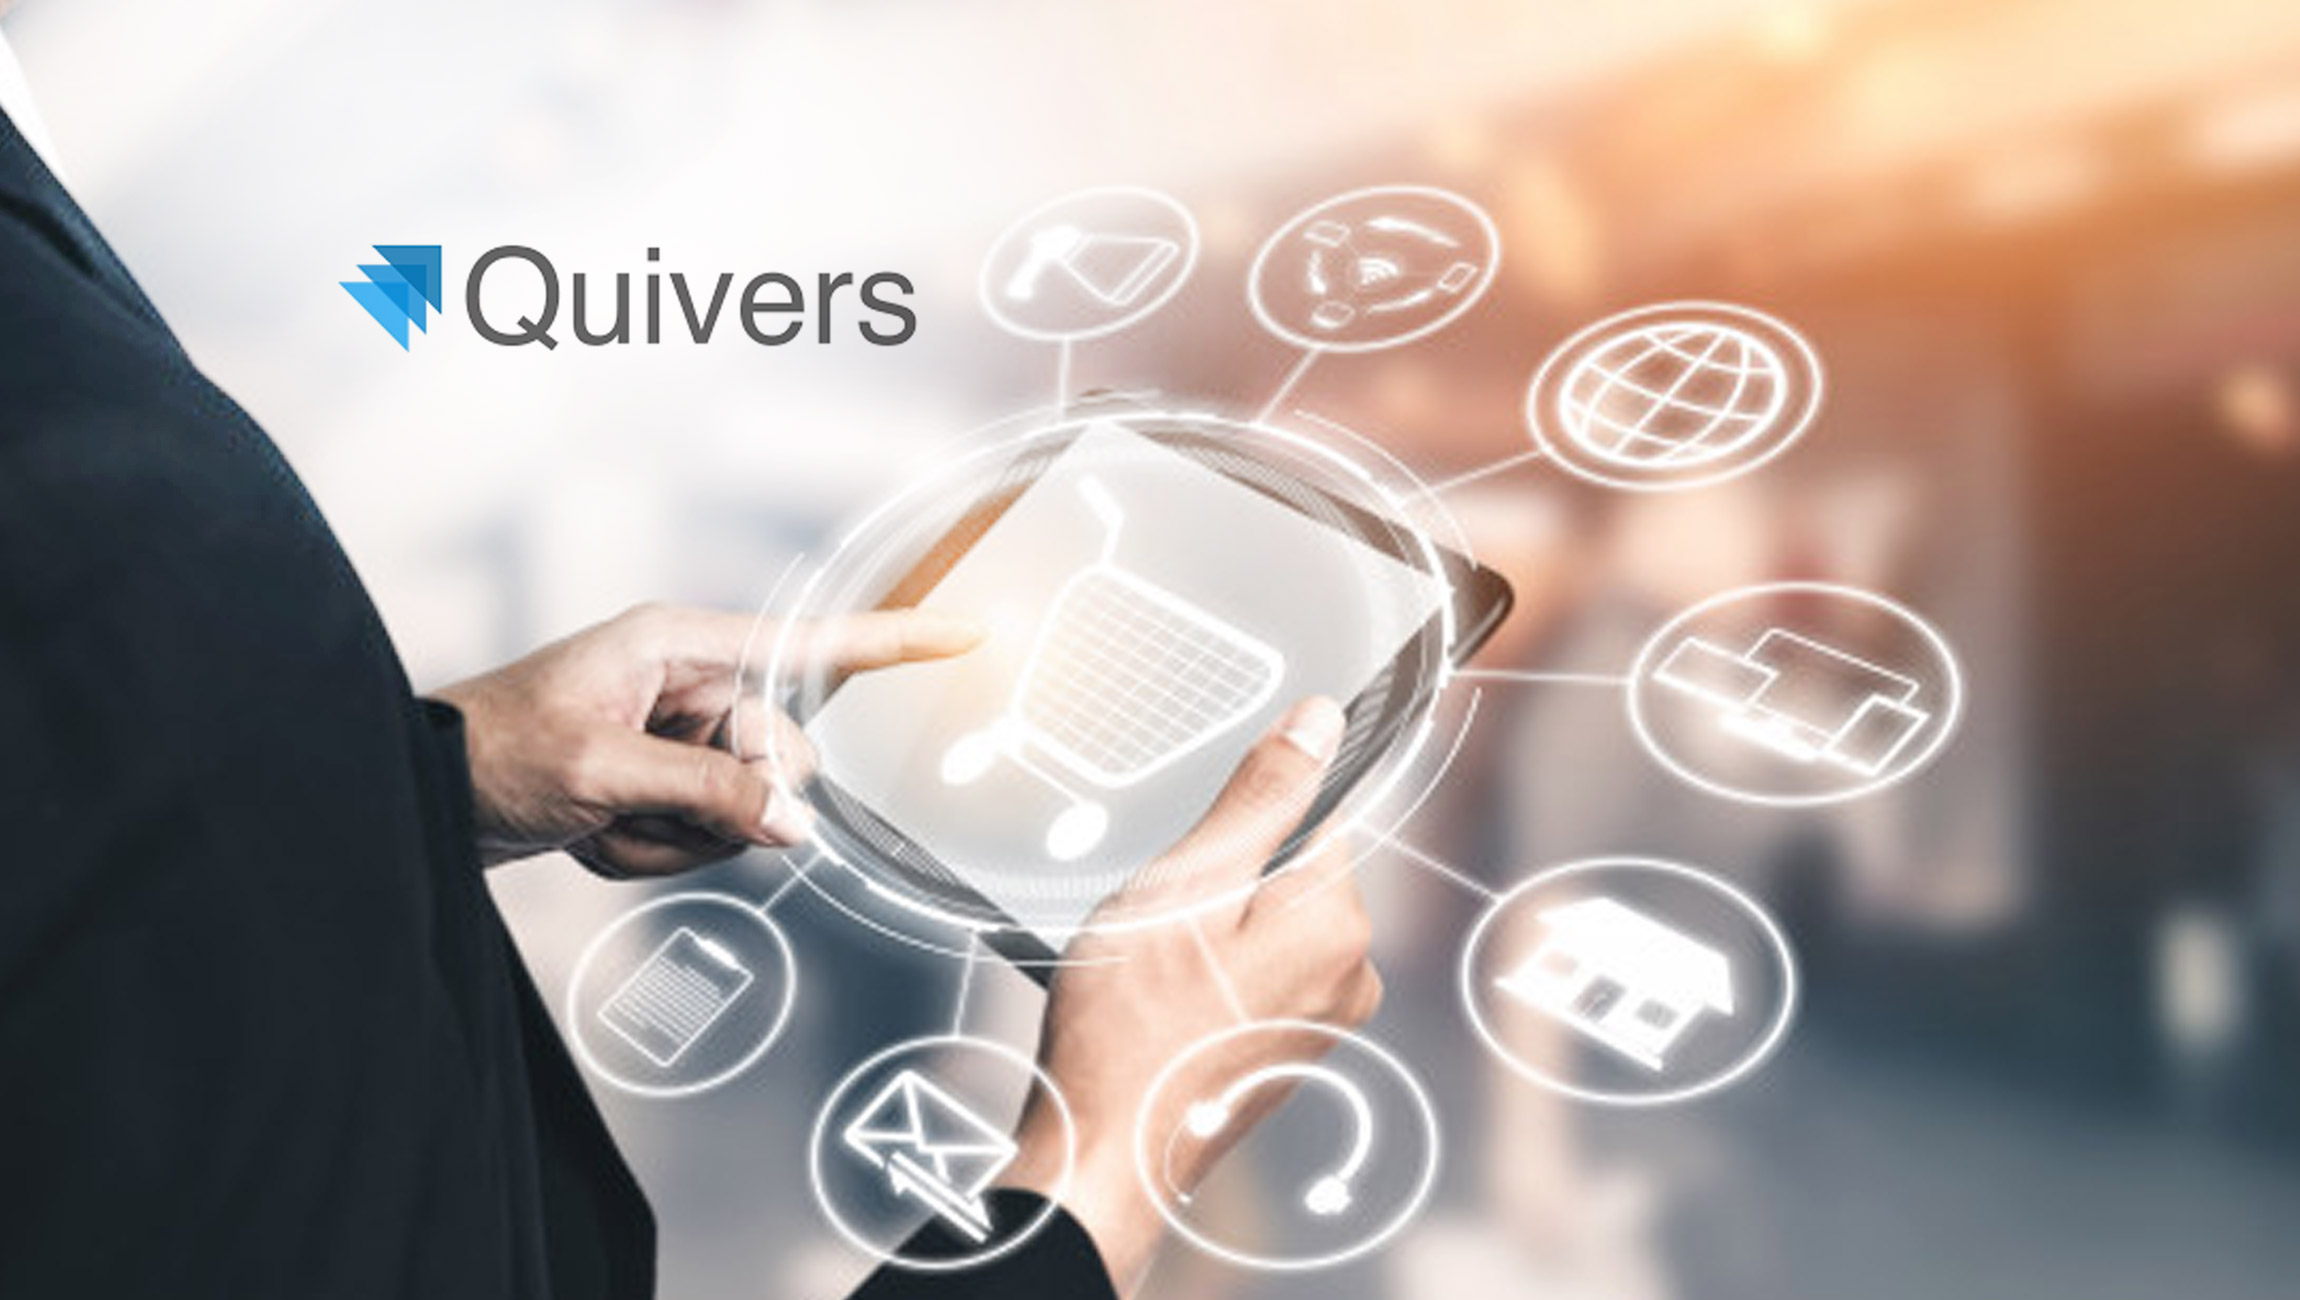 Quivers Adds Dealer Locator To Its Suite Of Online-To-Offline Commerce Solutions